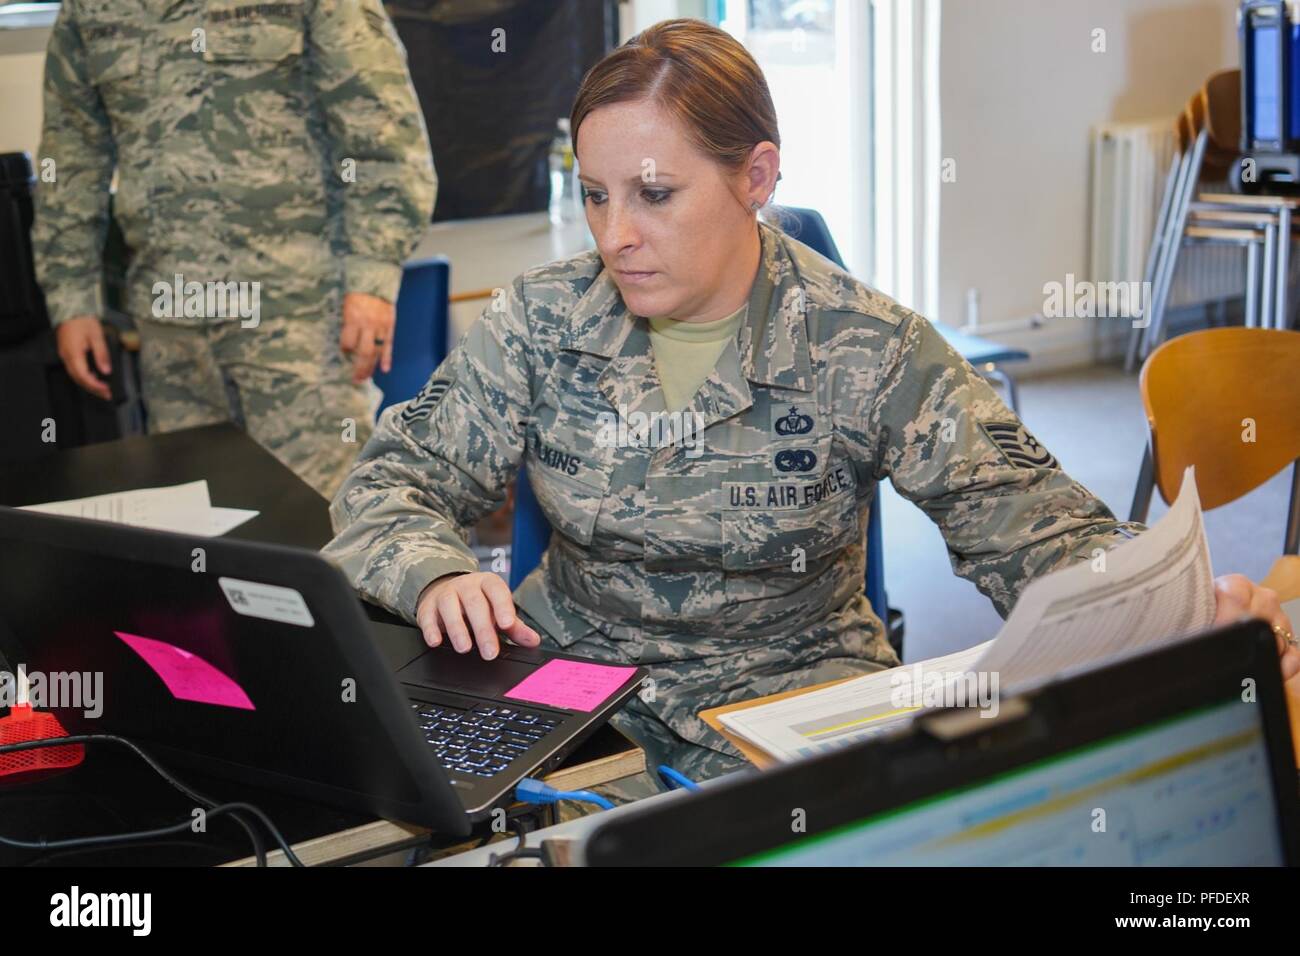 U.S. Air Force Tech. Sgt. Erin Wilkins, a squadron aviation resource manager with the 128th Airborne Command and Control Squadron, 116th Air Control Wing (ACW), logs data for the JSTARS team participating in BALTOPS and Saber Strike 18 exercises at Fighter Wing Skrydstrup, Denmark, June 5, 2018. The JSTARS team consists of the Georgia Air National Guard’s 116th ACW, plus active duty personnel assigned to the 461st ACW and Army JSTARS. They are in Denmark to participate in Exercise Baltic Operations, or BALTOPS, June 4-15 and Saber Strike 18 from June 3-15. JSTARS brings a unique, manned, joint Stock Photo